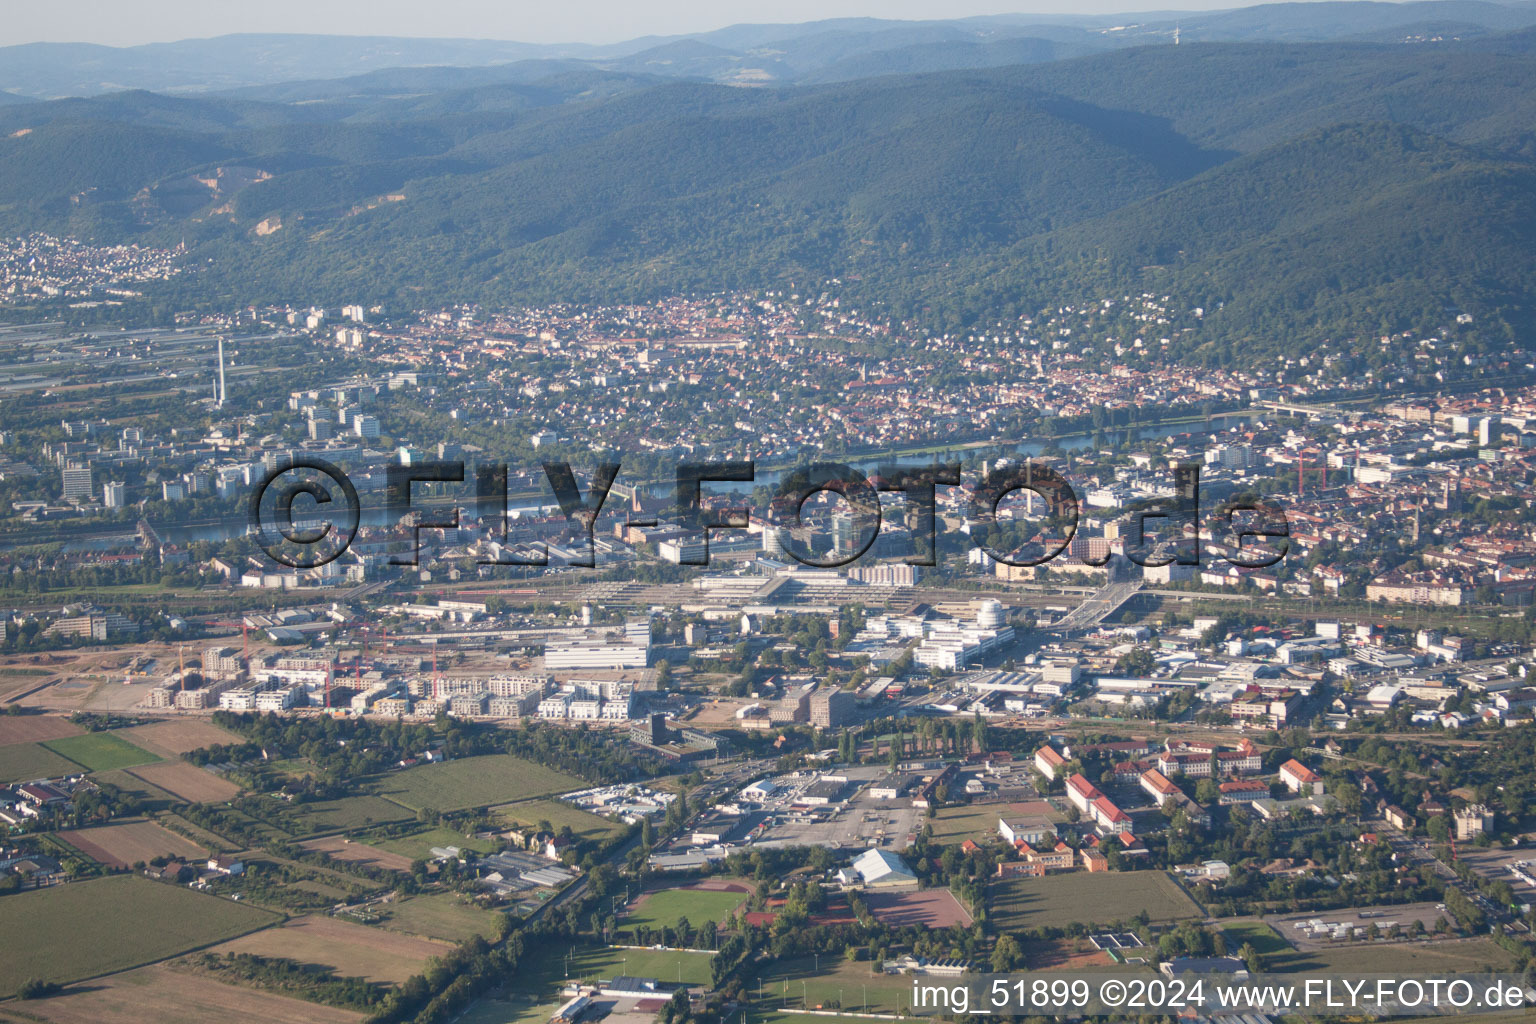 Under construction in the district Bahnstadt in Heidelberg in the state Baden-Wuerttemberg, Germany